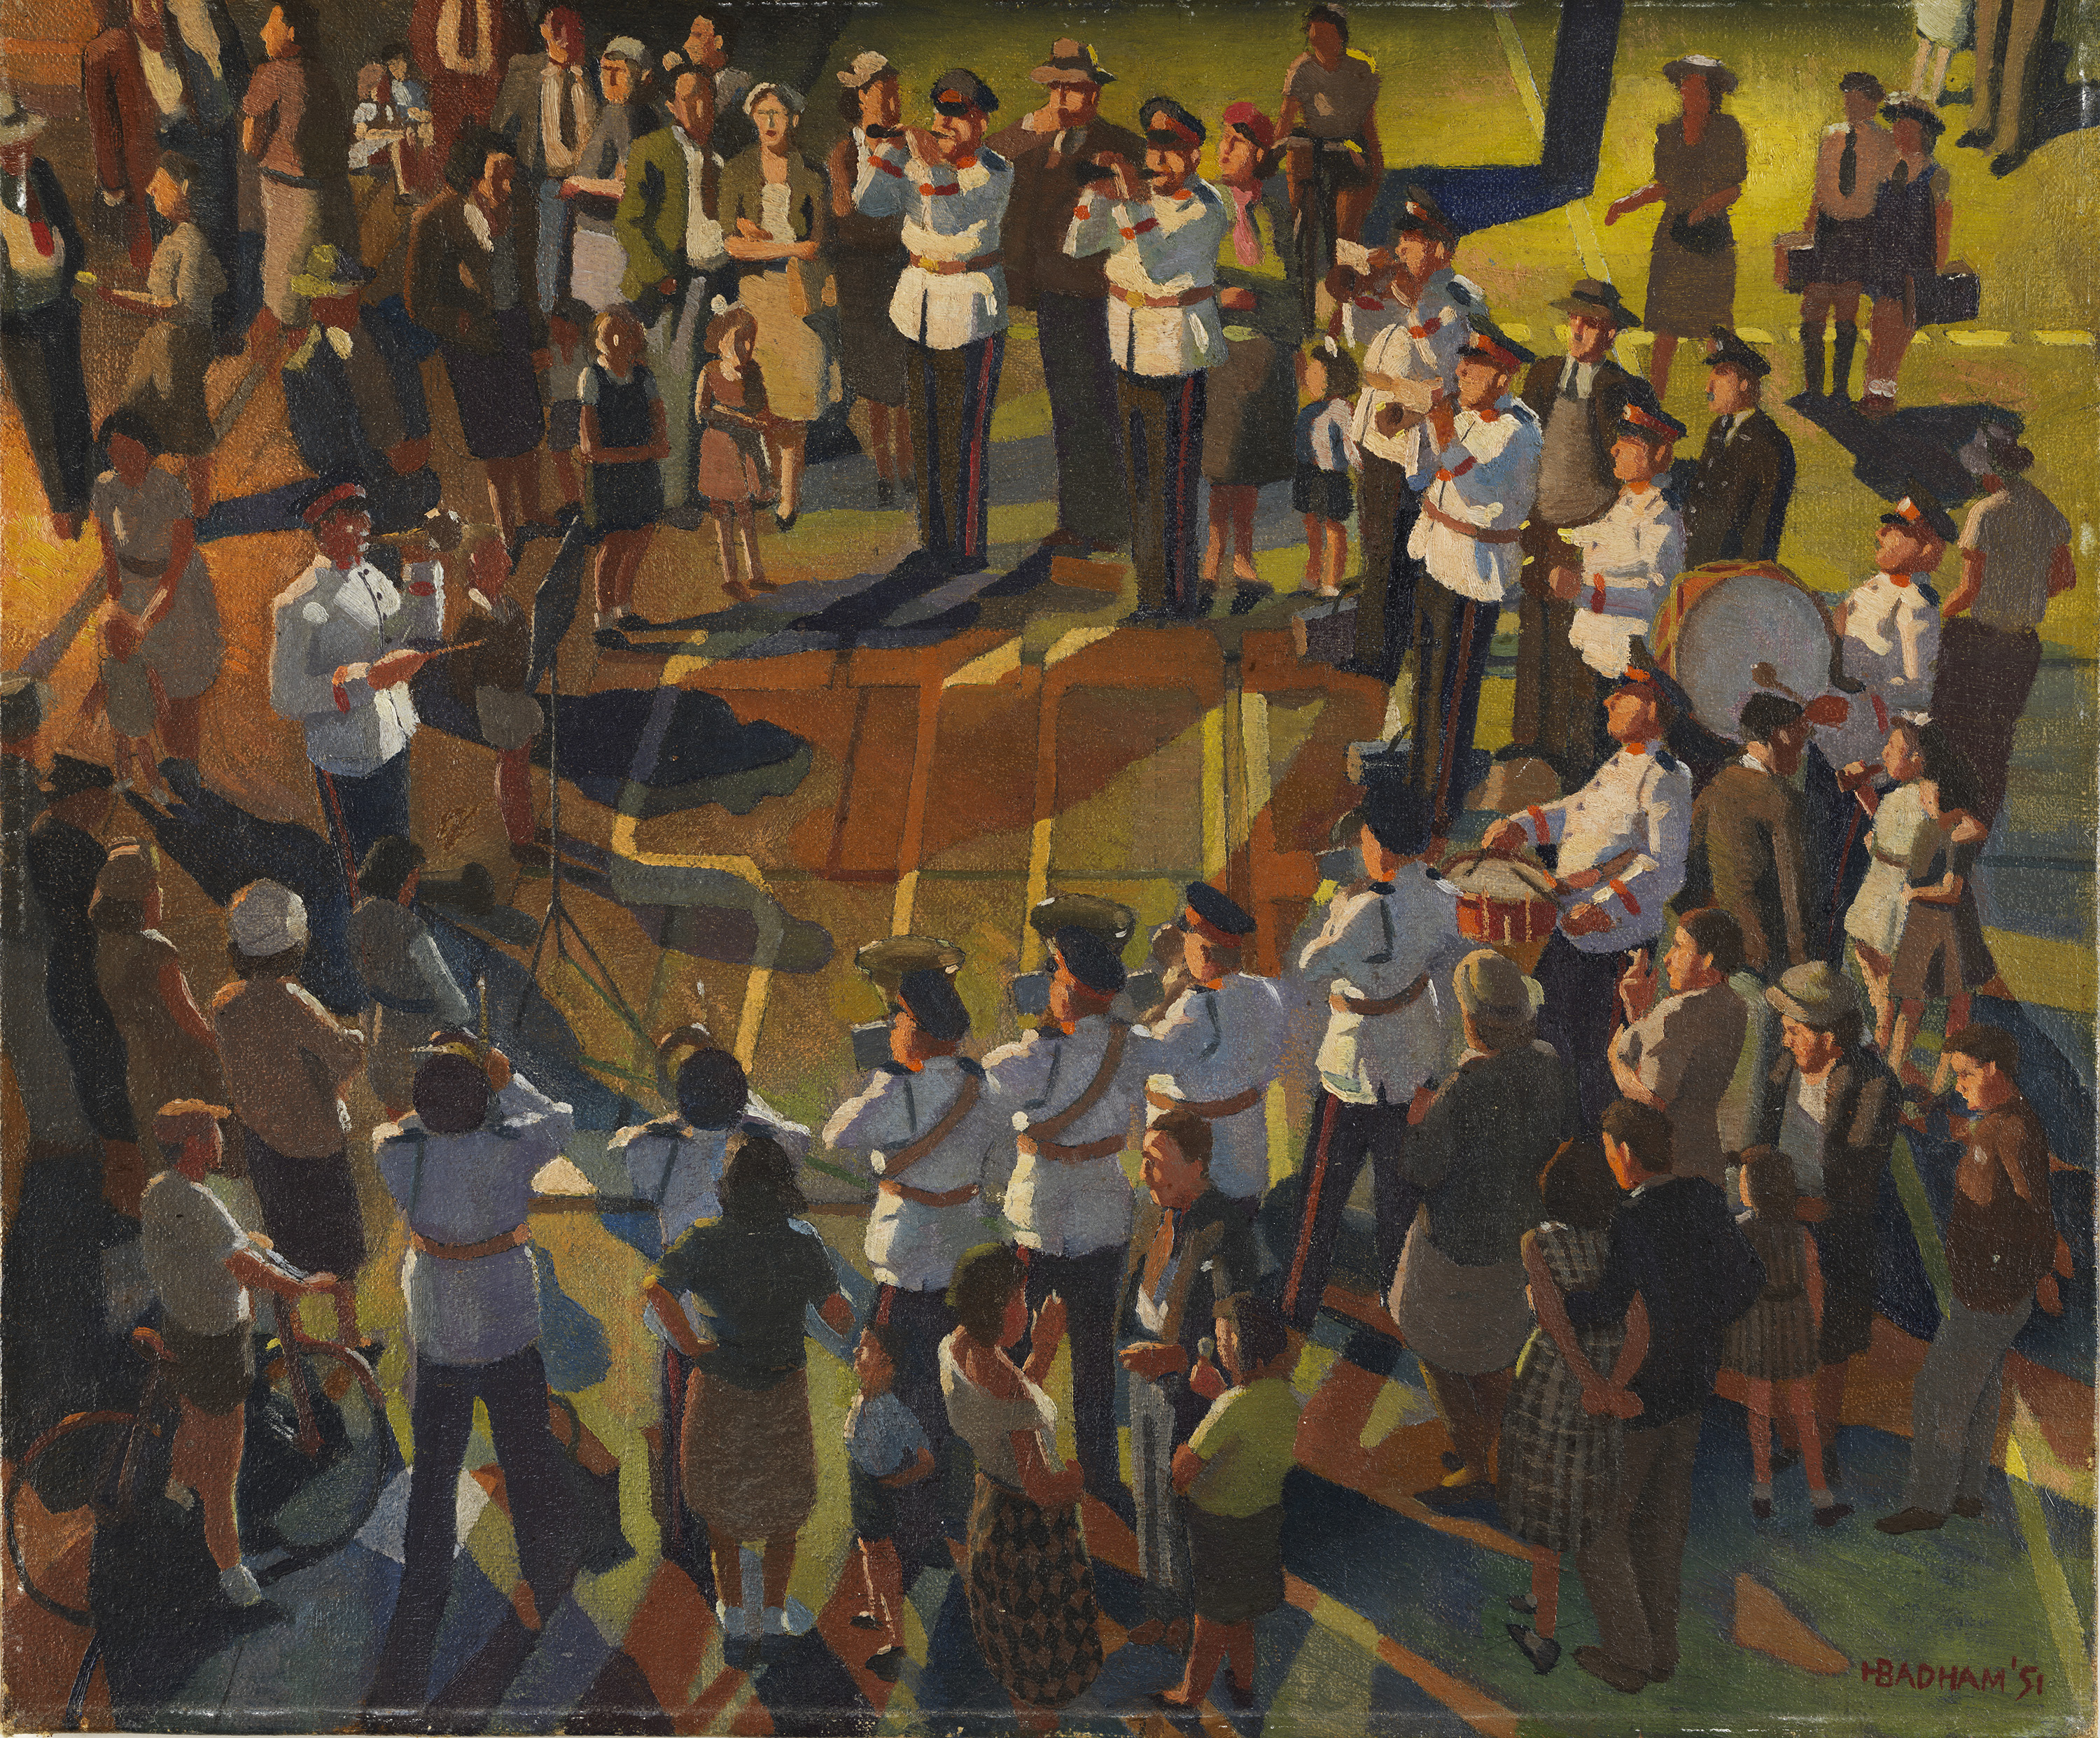 Colourful painting of a band playing in the street